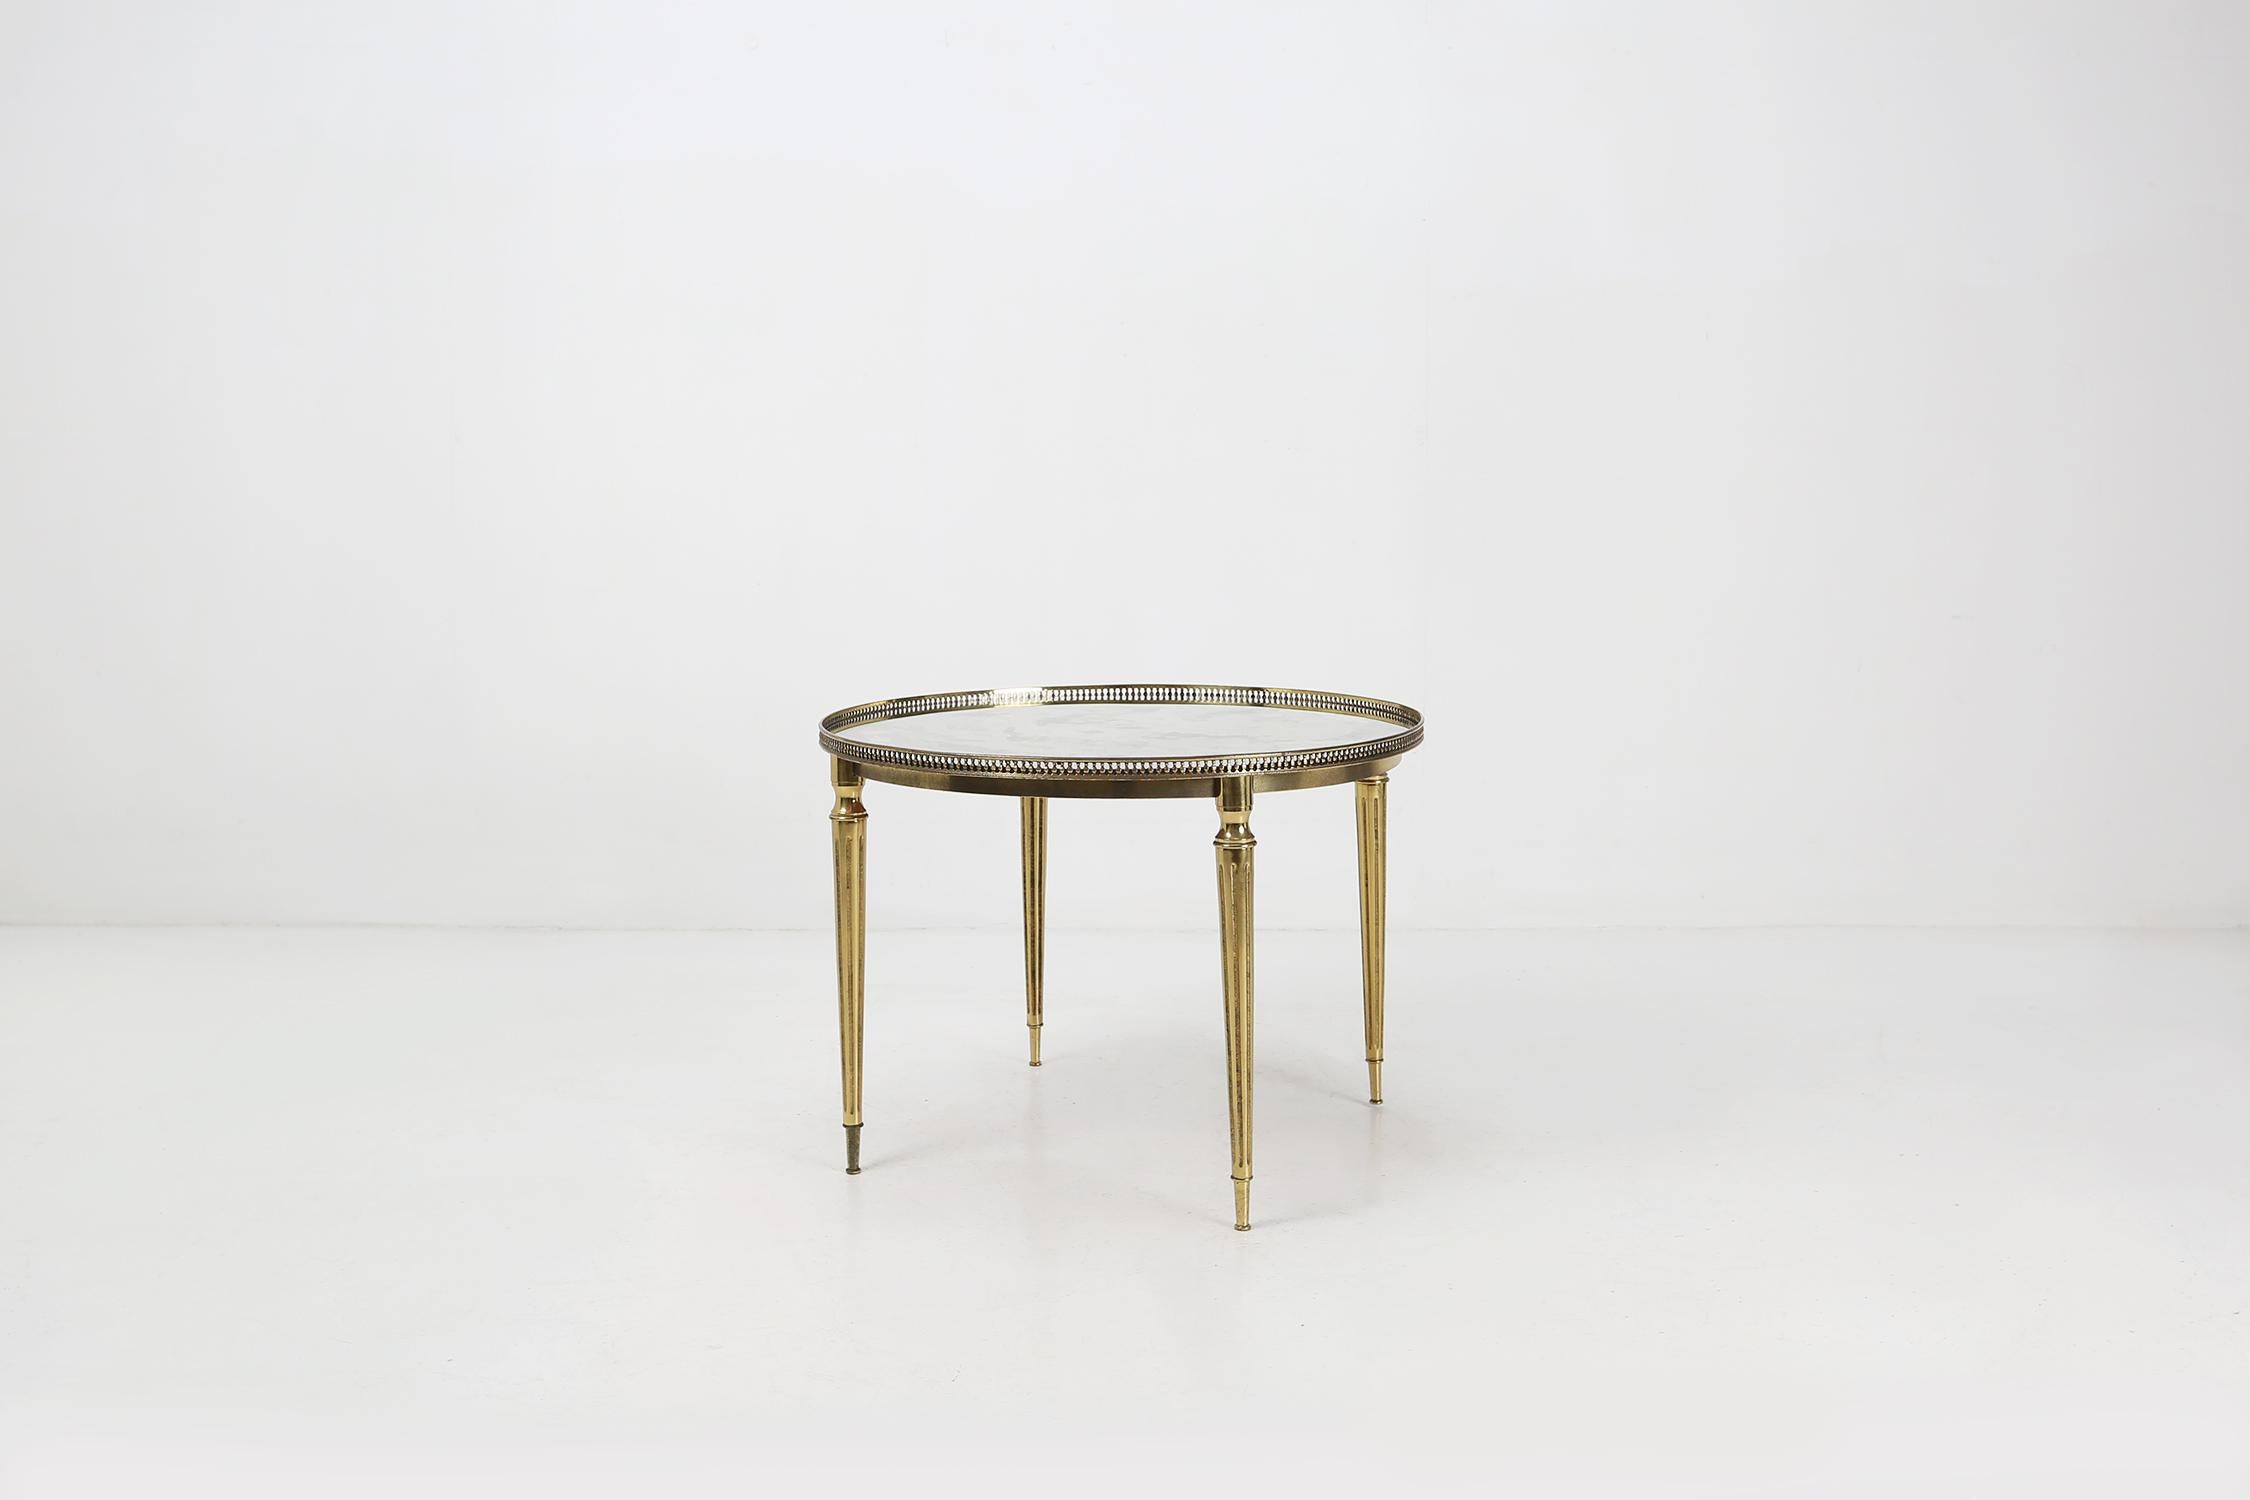 Coffee table by Maison Jansen produced in the 1950s with brass frames and smoked glass top.